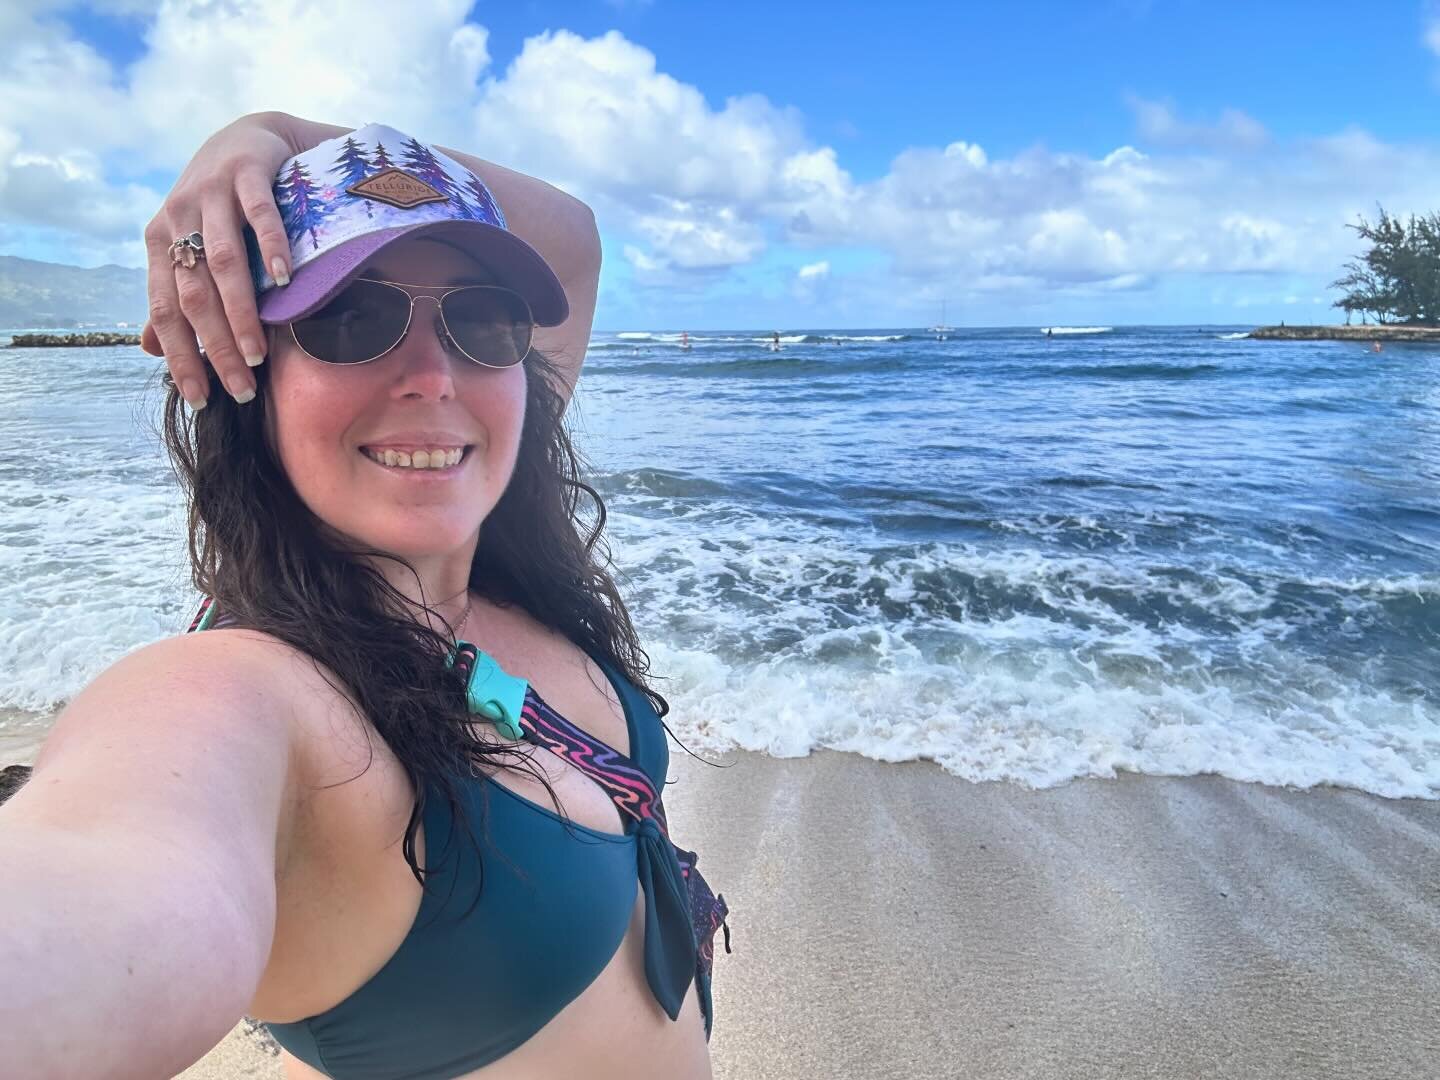 Most know I love the mountains, but my first love was and will alway  be the ocean. She is one magical force, esp here in North Shore of Oahu!

I won&rsquo;t ever forget this trip!

#northshore #northshoreoahu #oahuhawaii #oahu #hawaii #island #adven